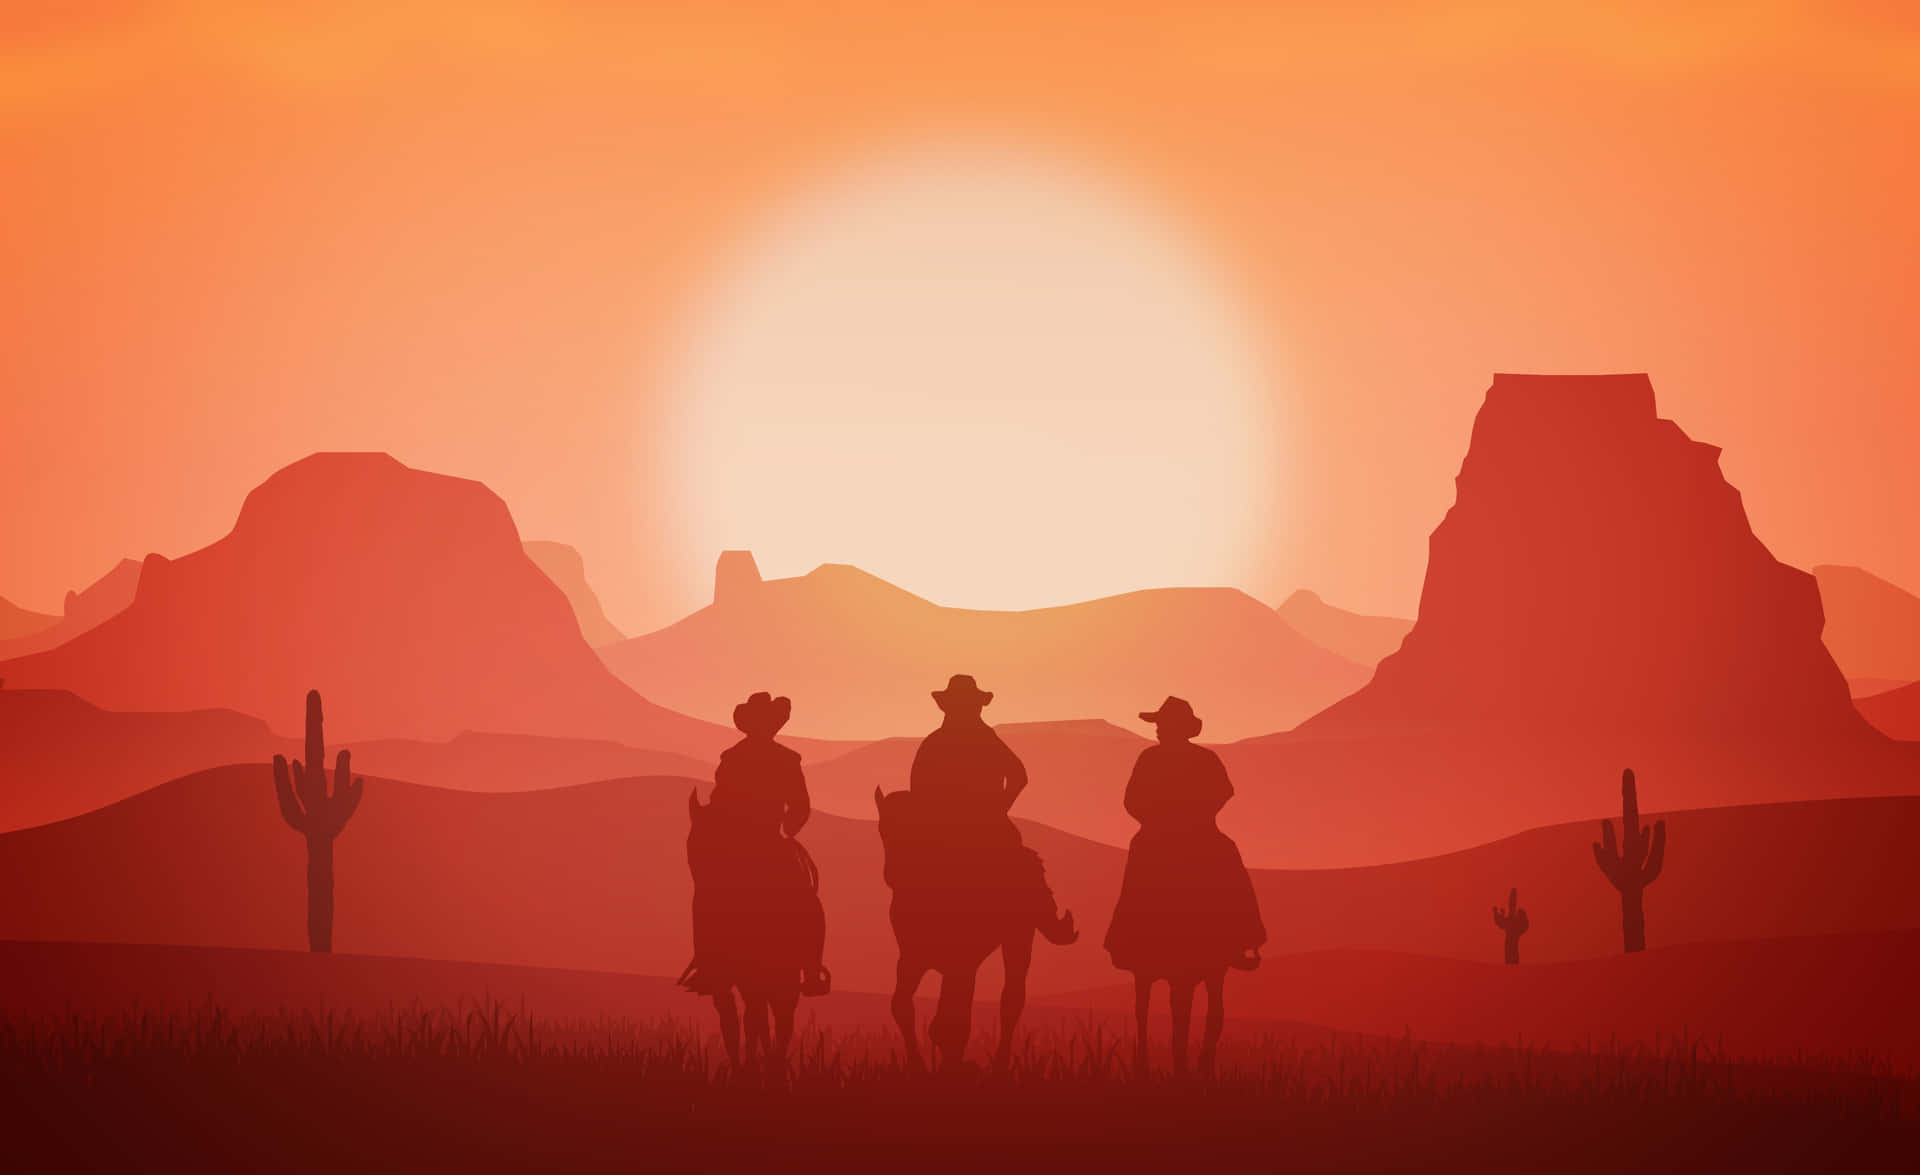 A Lone Cowboy Riding Horse, Sunset Silhouette